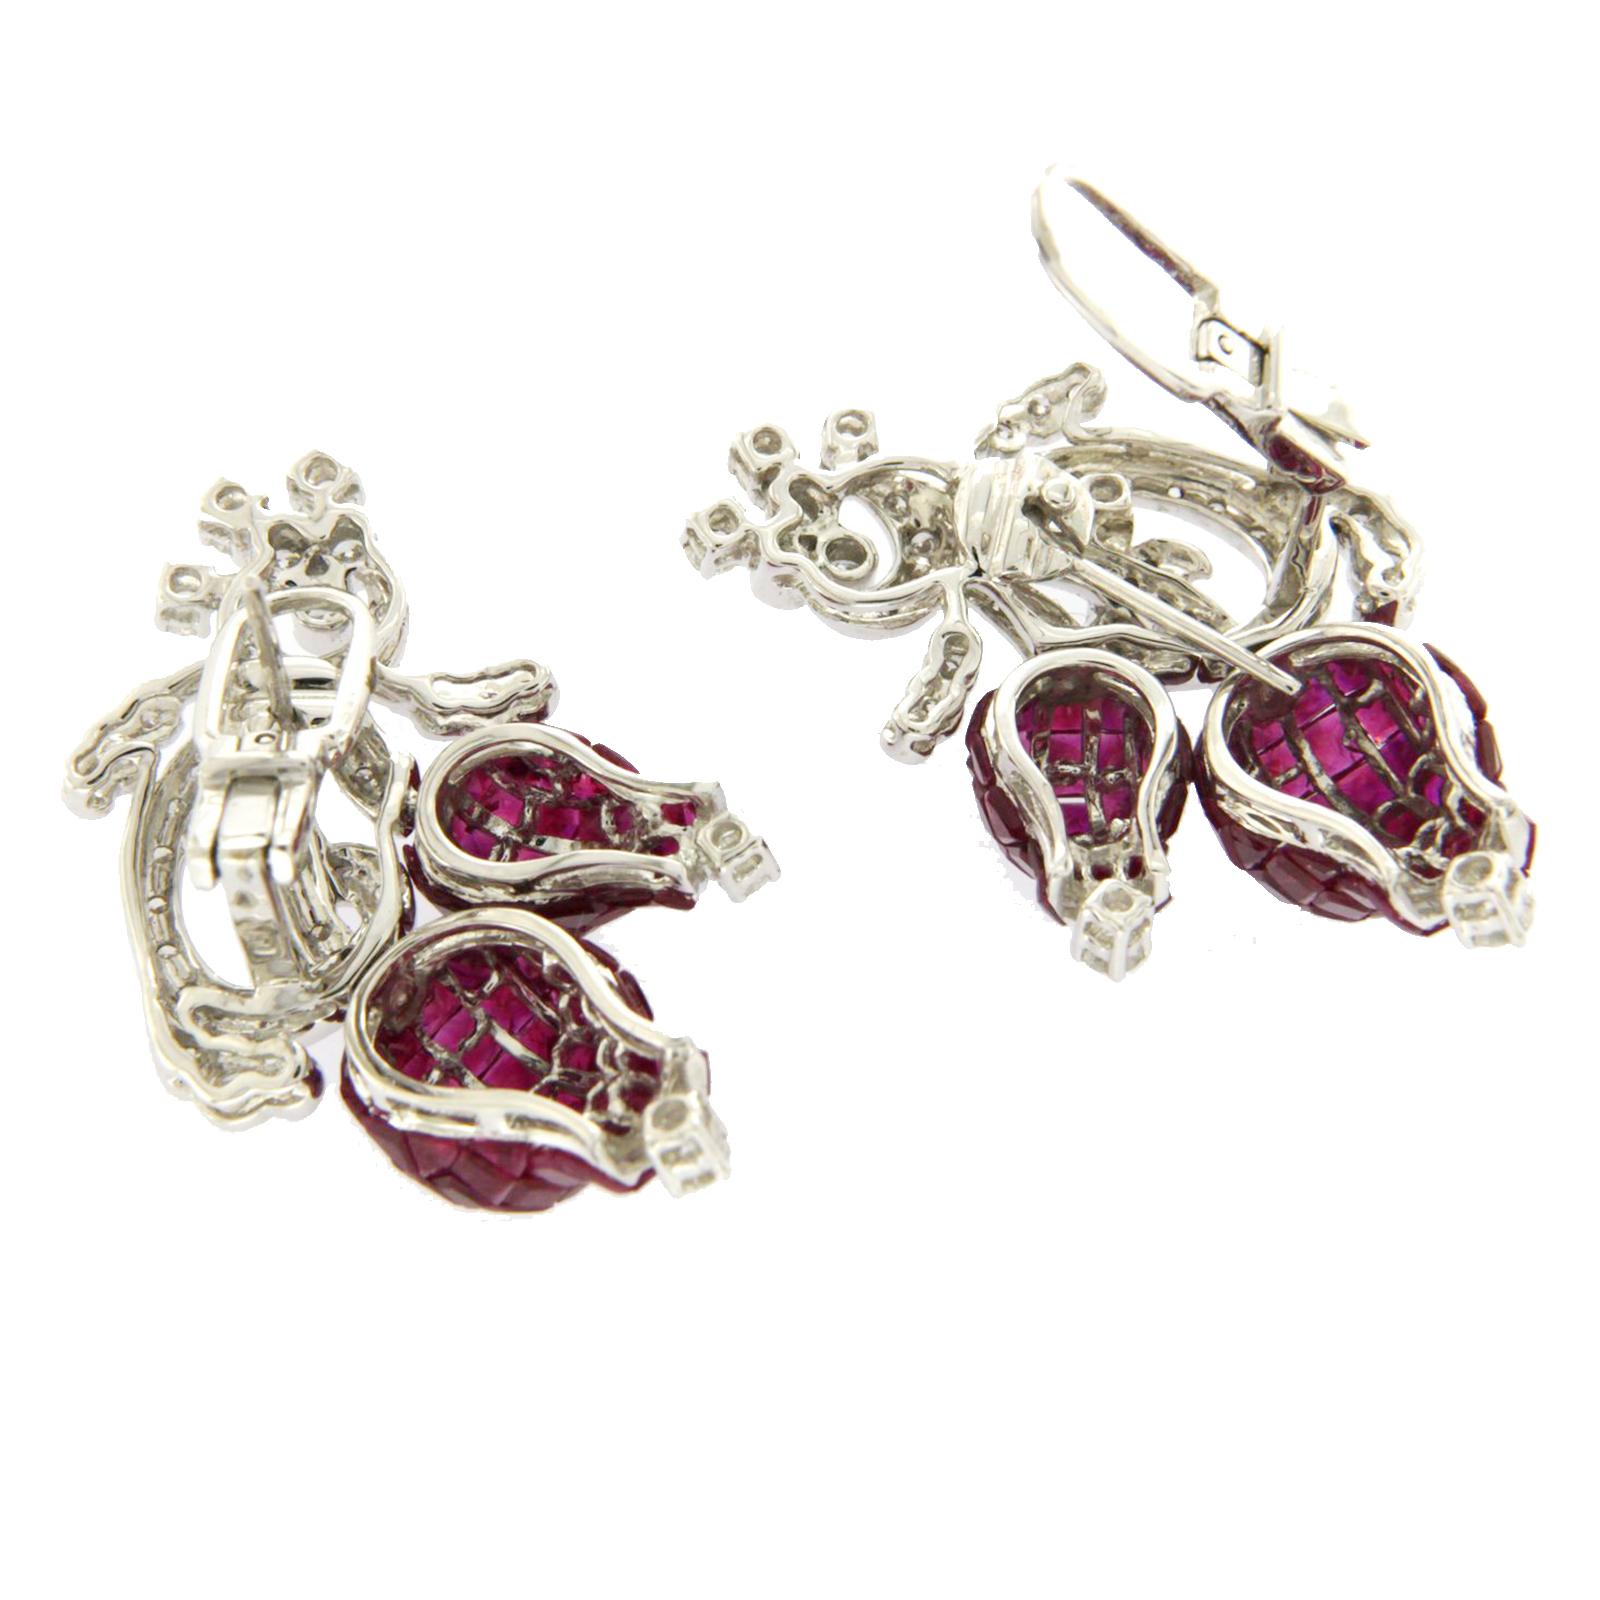 18 Kara Gold 1.99 Carat Diamonds and Invisible 25.22 Carat Ruby Tulip Earrings For Sale 2